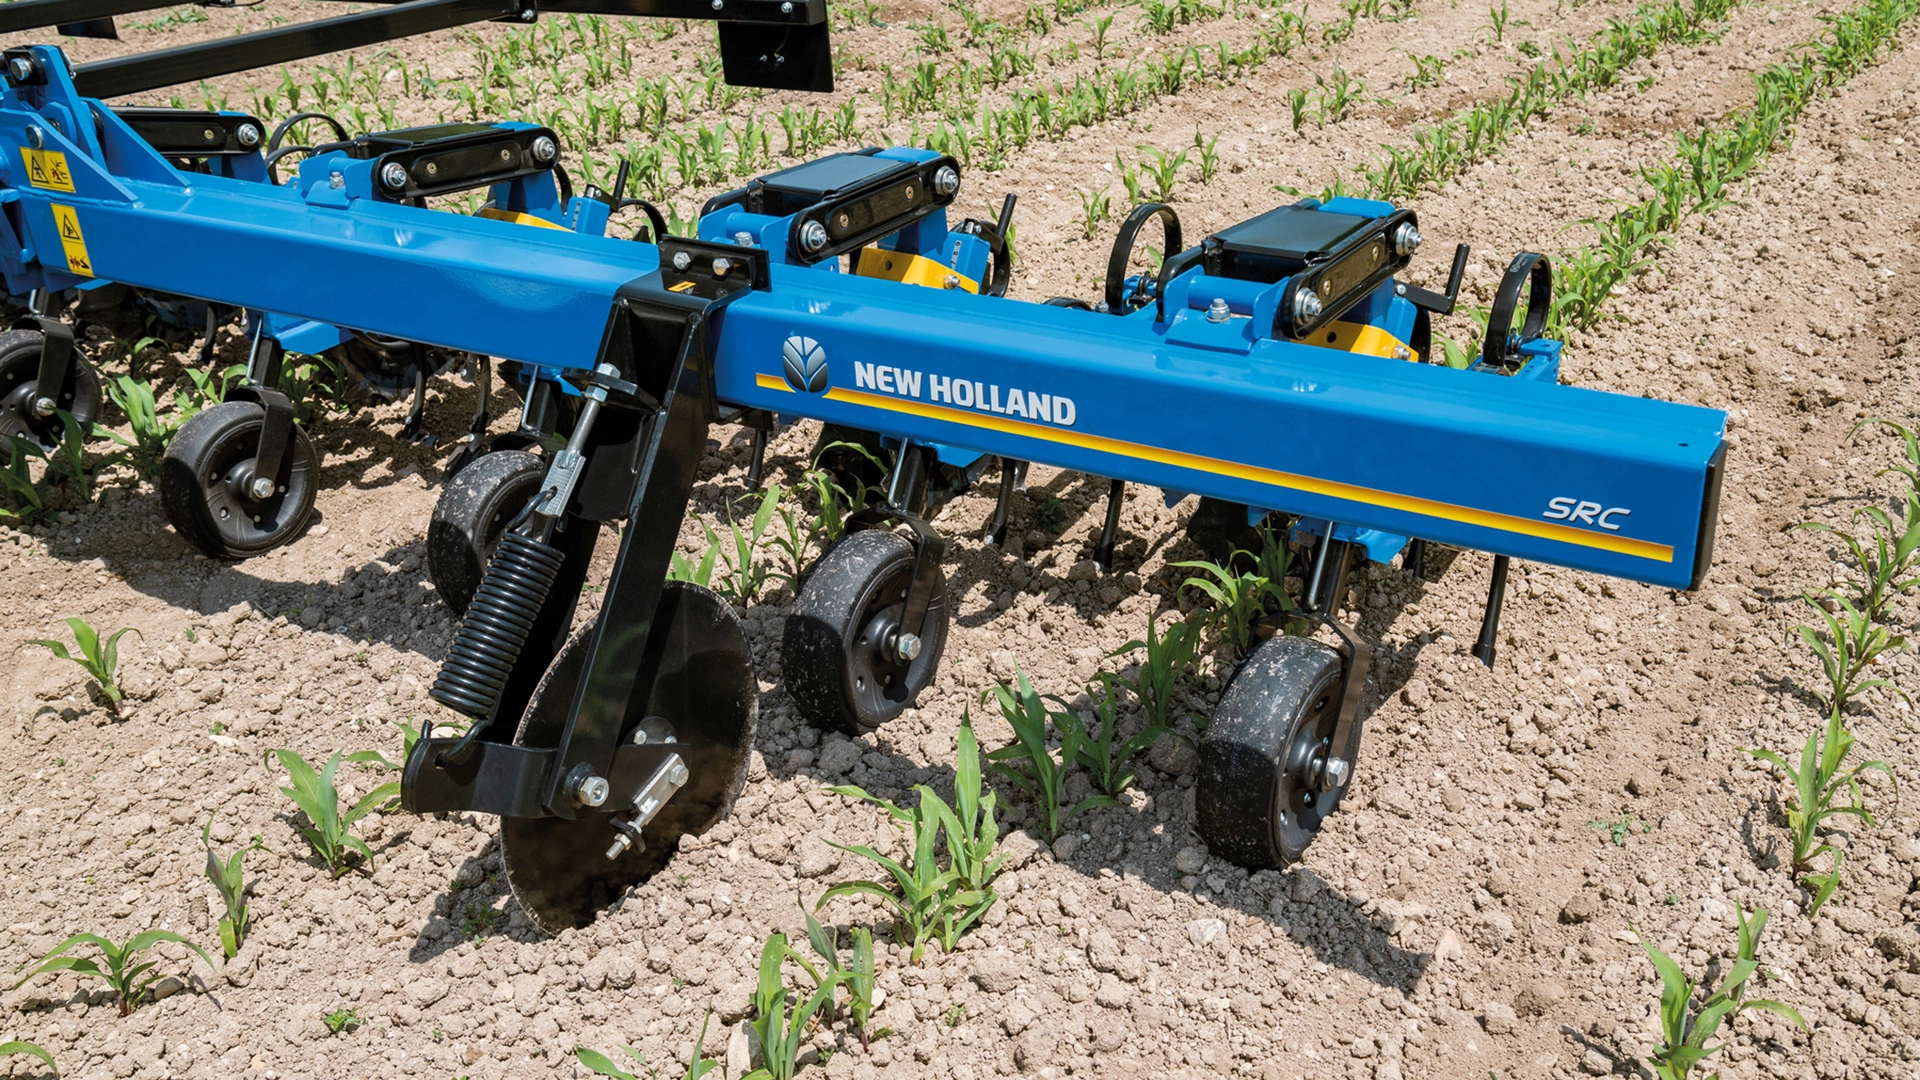 Close shot of New Holland's SRC ＆ SRC SMARTSTEER™ Inter-Row Cultivators, cultivating the soil between green rows on a farm field